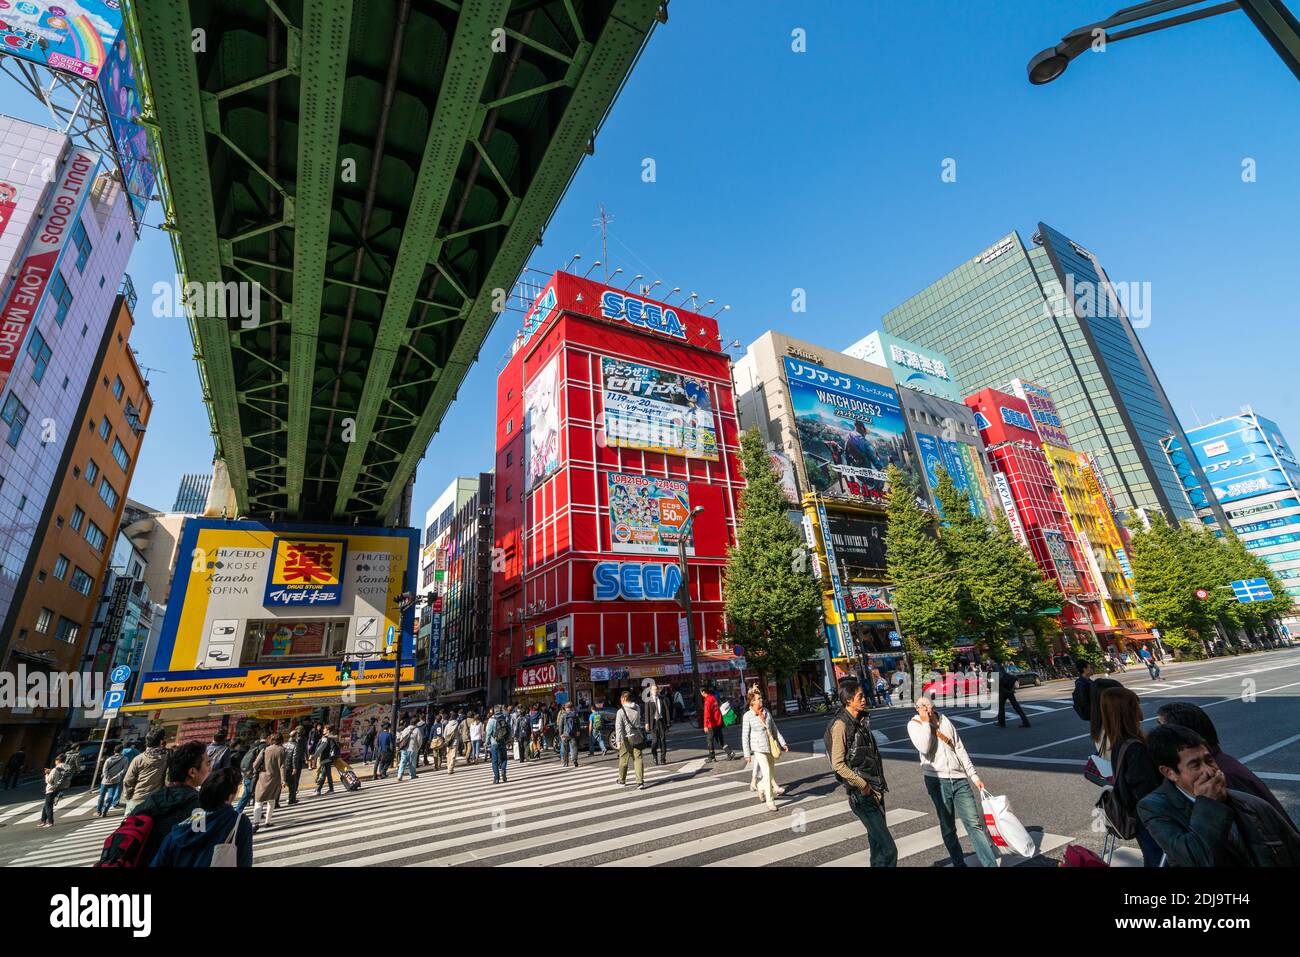 Tokyo, Japan - NOV 13, 2016: Akihabara Electric Town in Tokyo. Akihabara is  a popular shopping district for video games, anime, manga, and computer  Stock Photo - Alamy